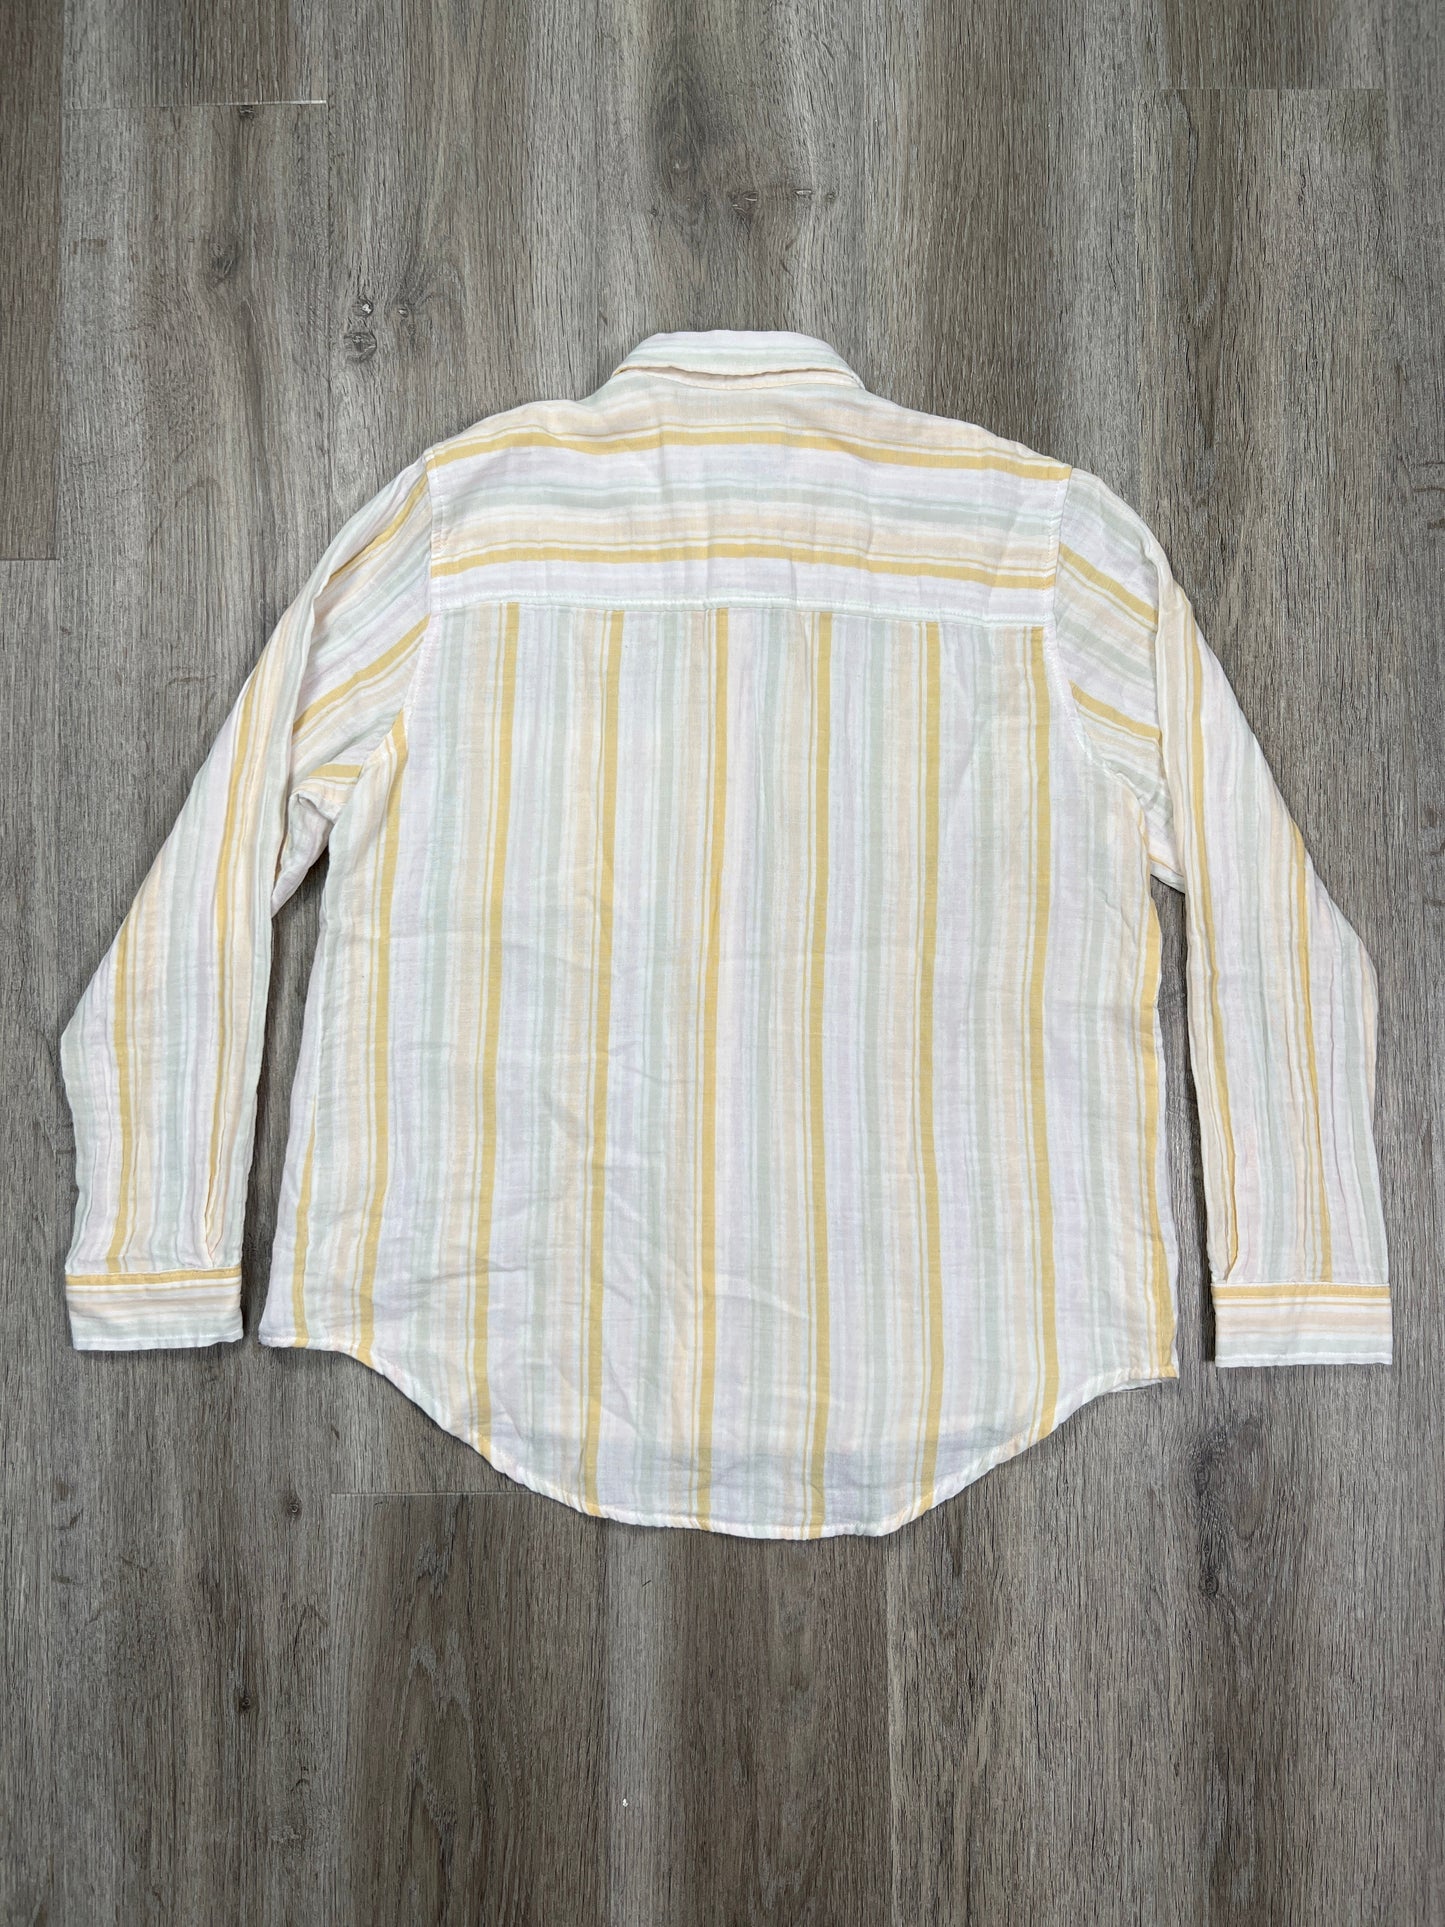 Striped Pattern Top Long Sleeve Universal Thread, Size M